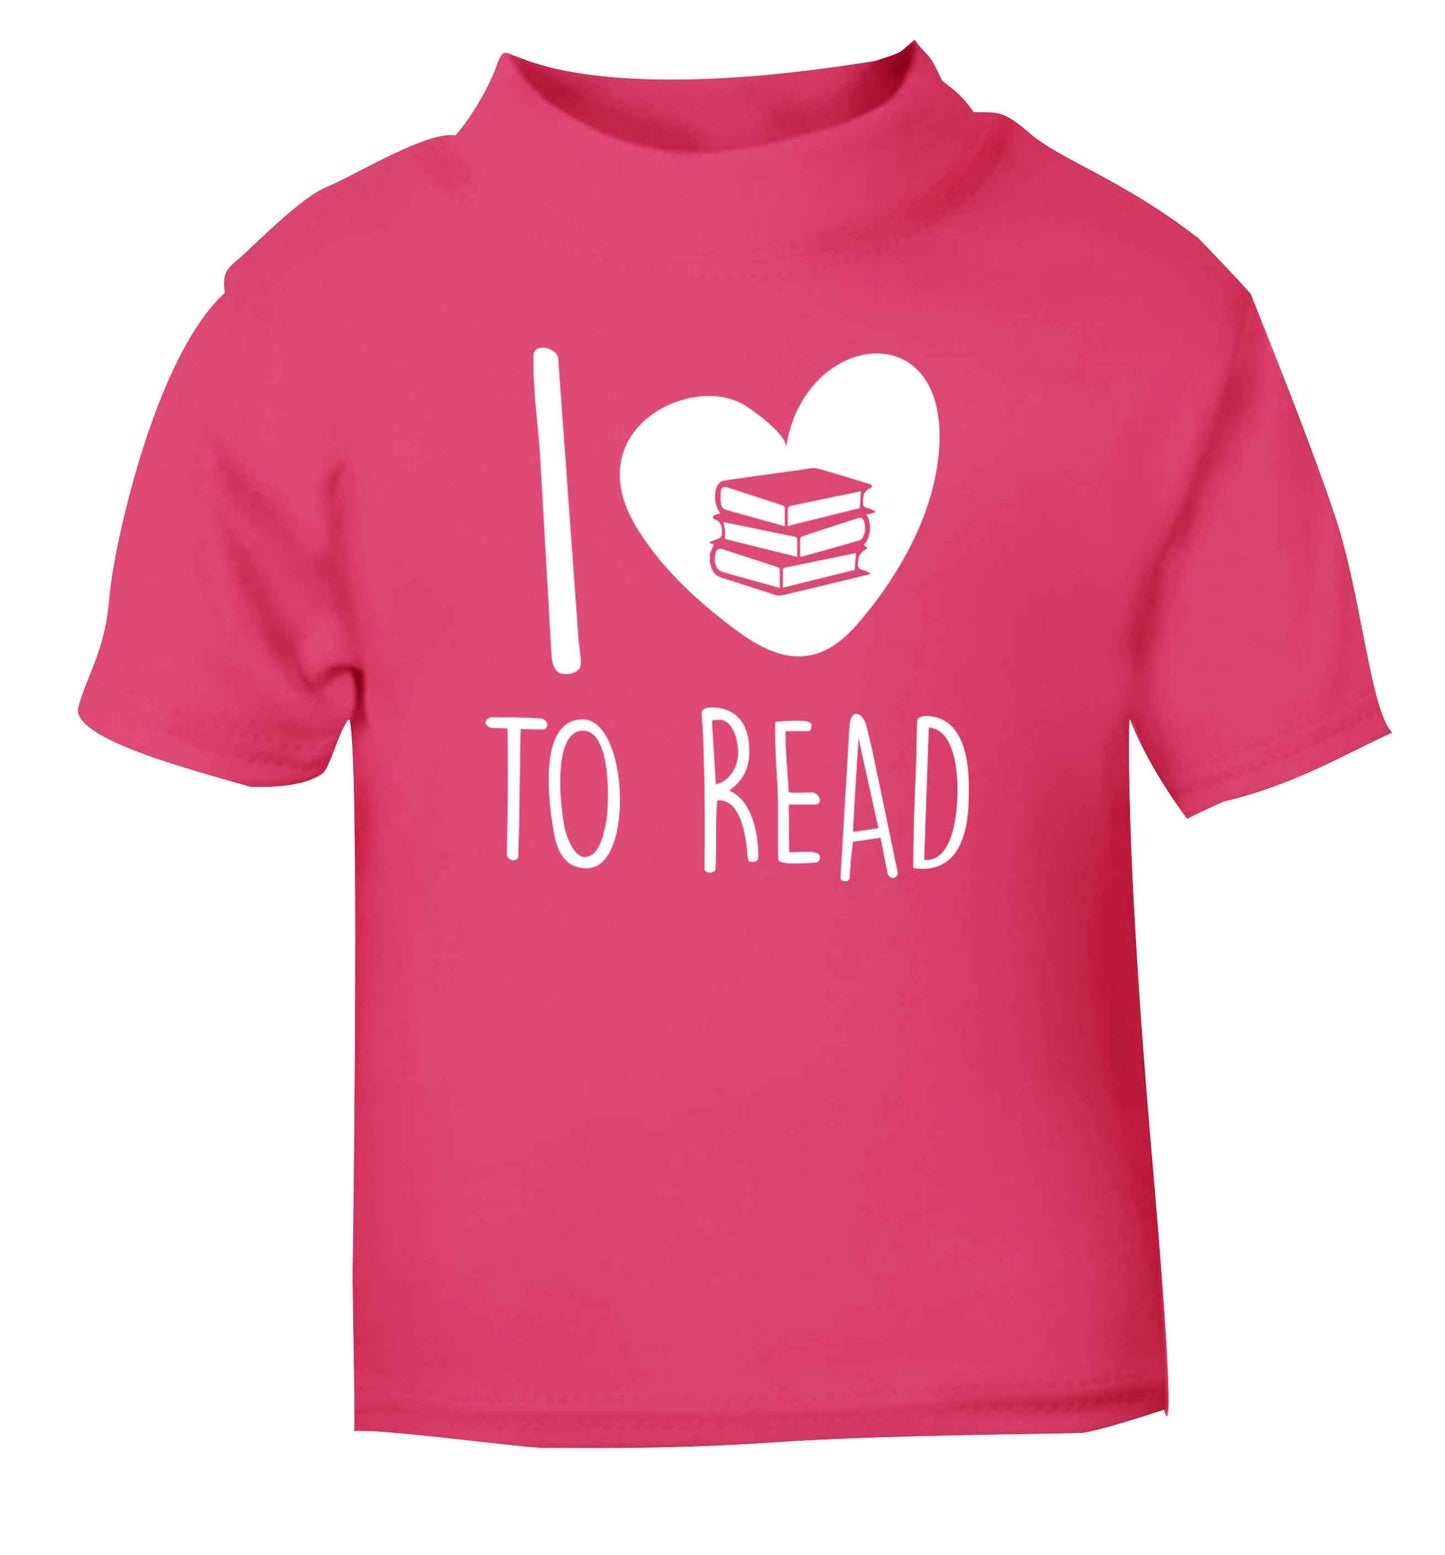 I love to read pink Baby Toddler Tshirt 2 Years